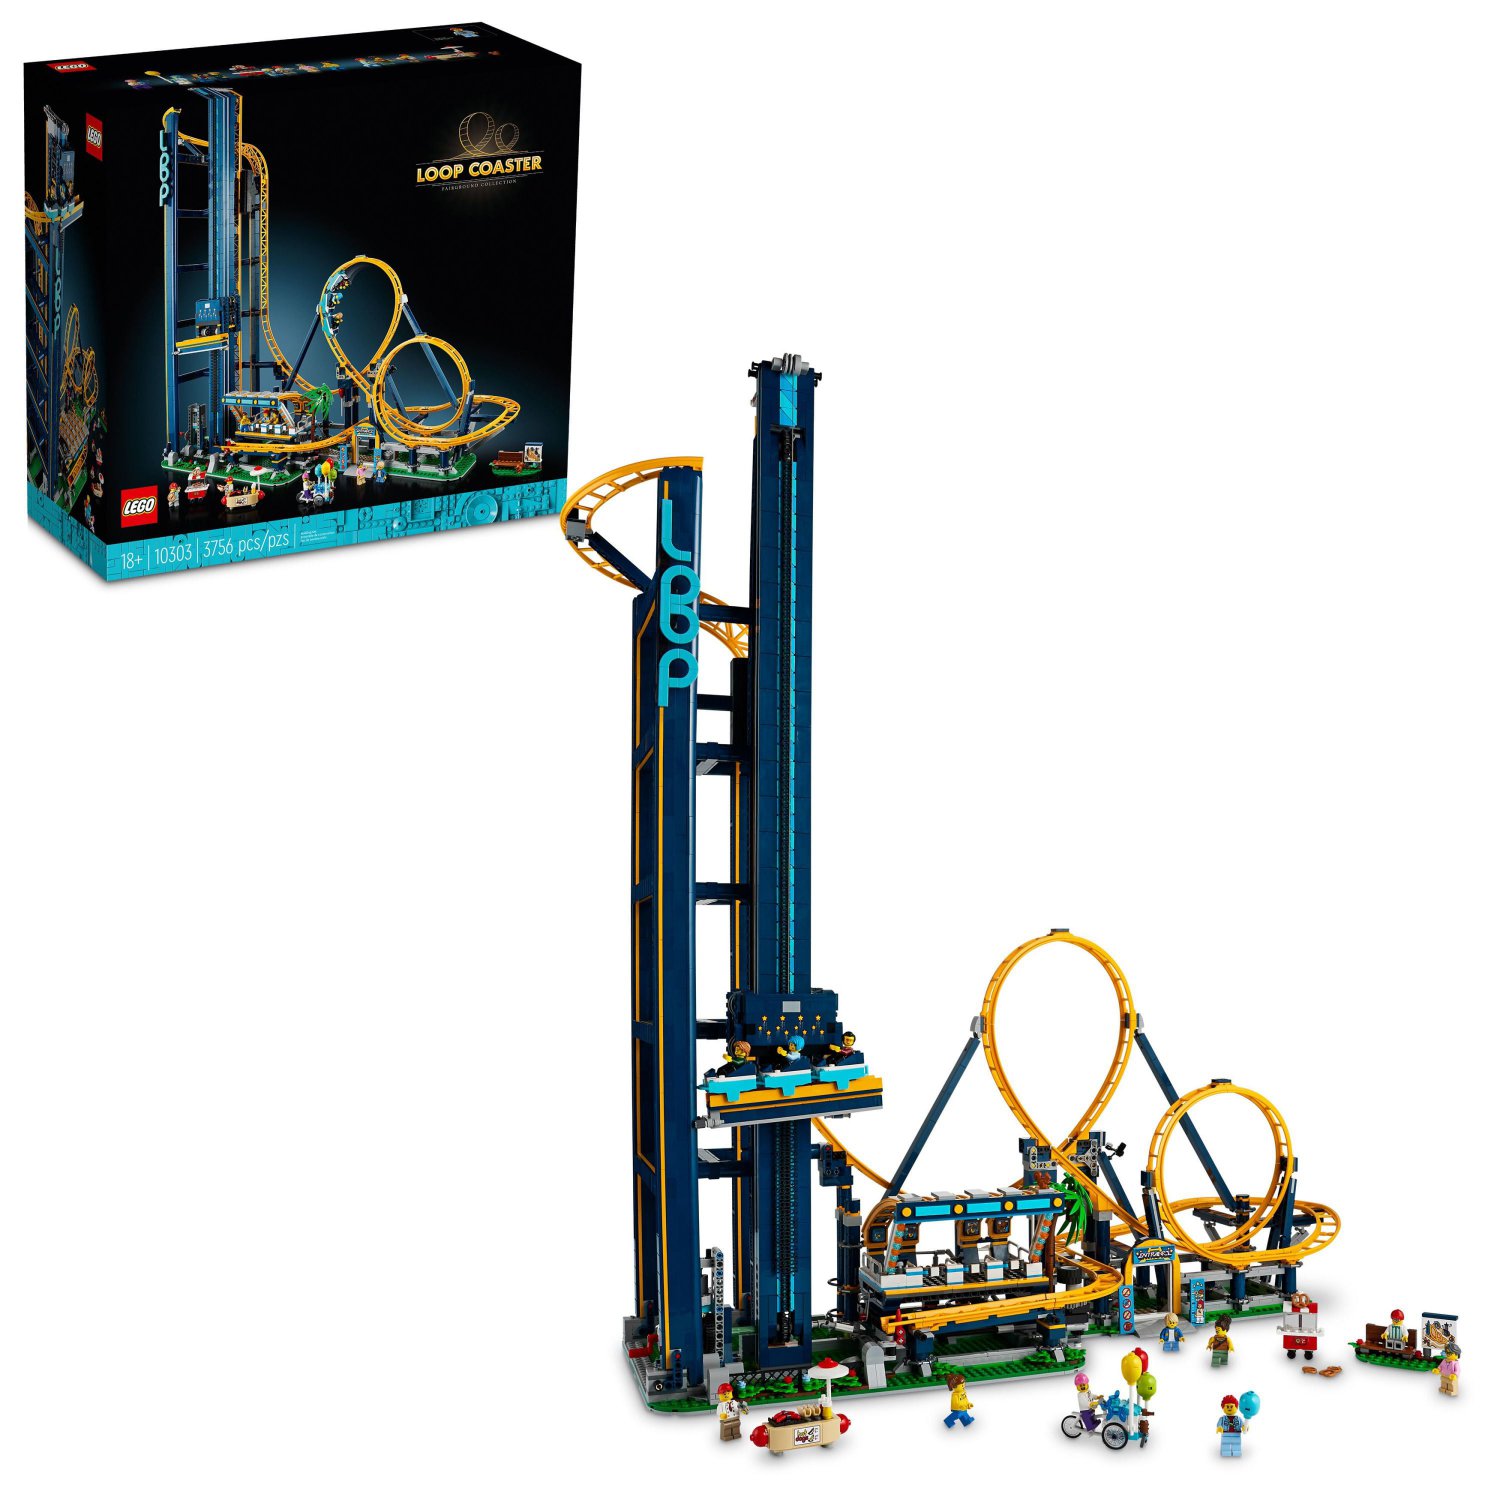 LEGO Loop Coaster 10303 Building Set for Adults (3,756 Pieces)